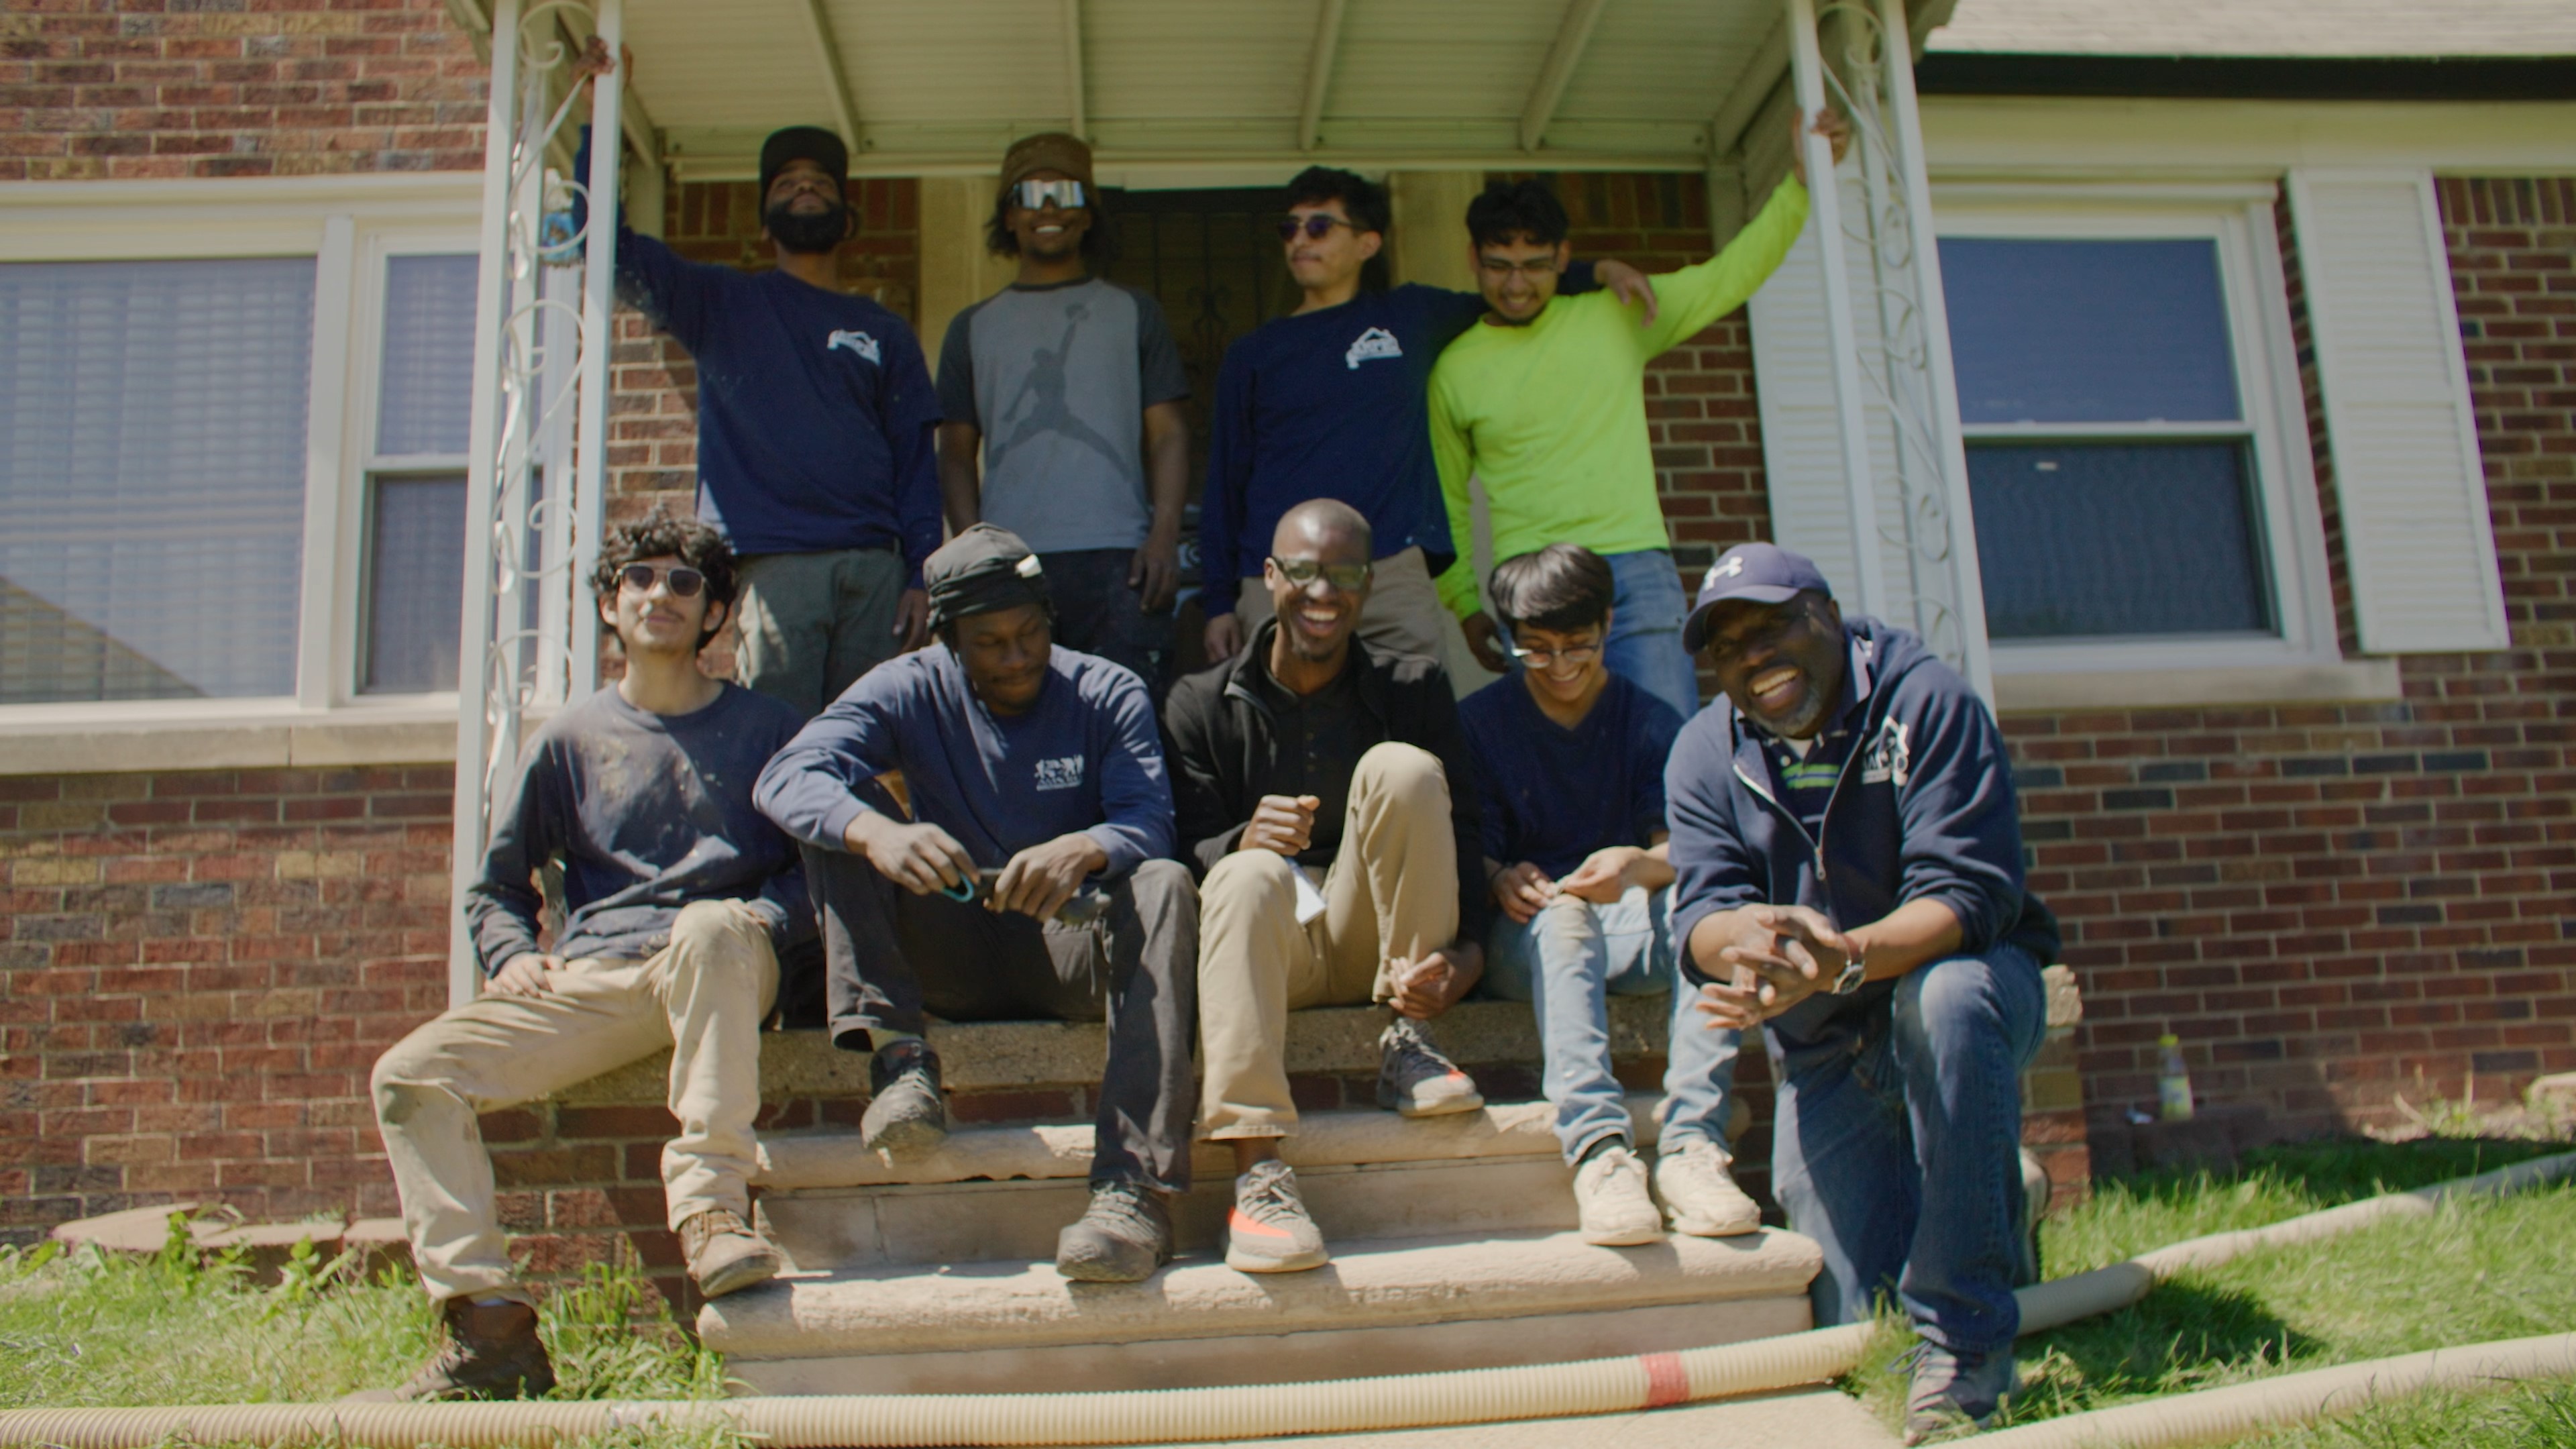 Alijah Thomas and his community gathered for a group photo on the porch of a house.